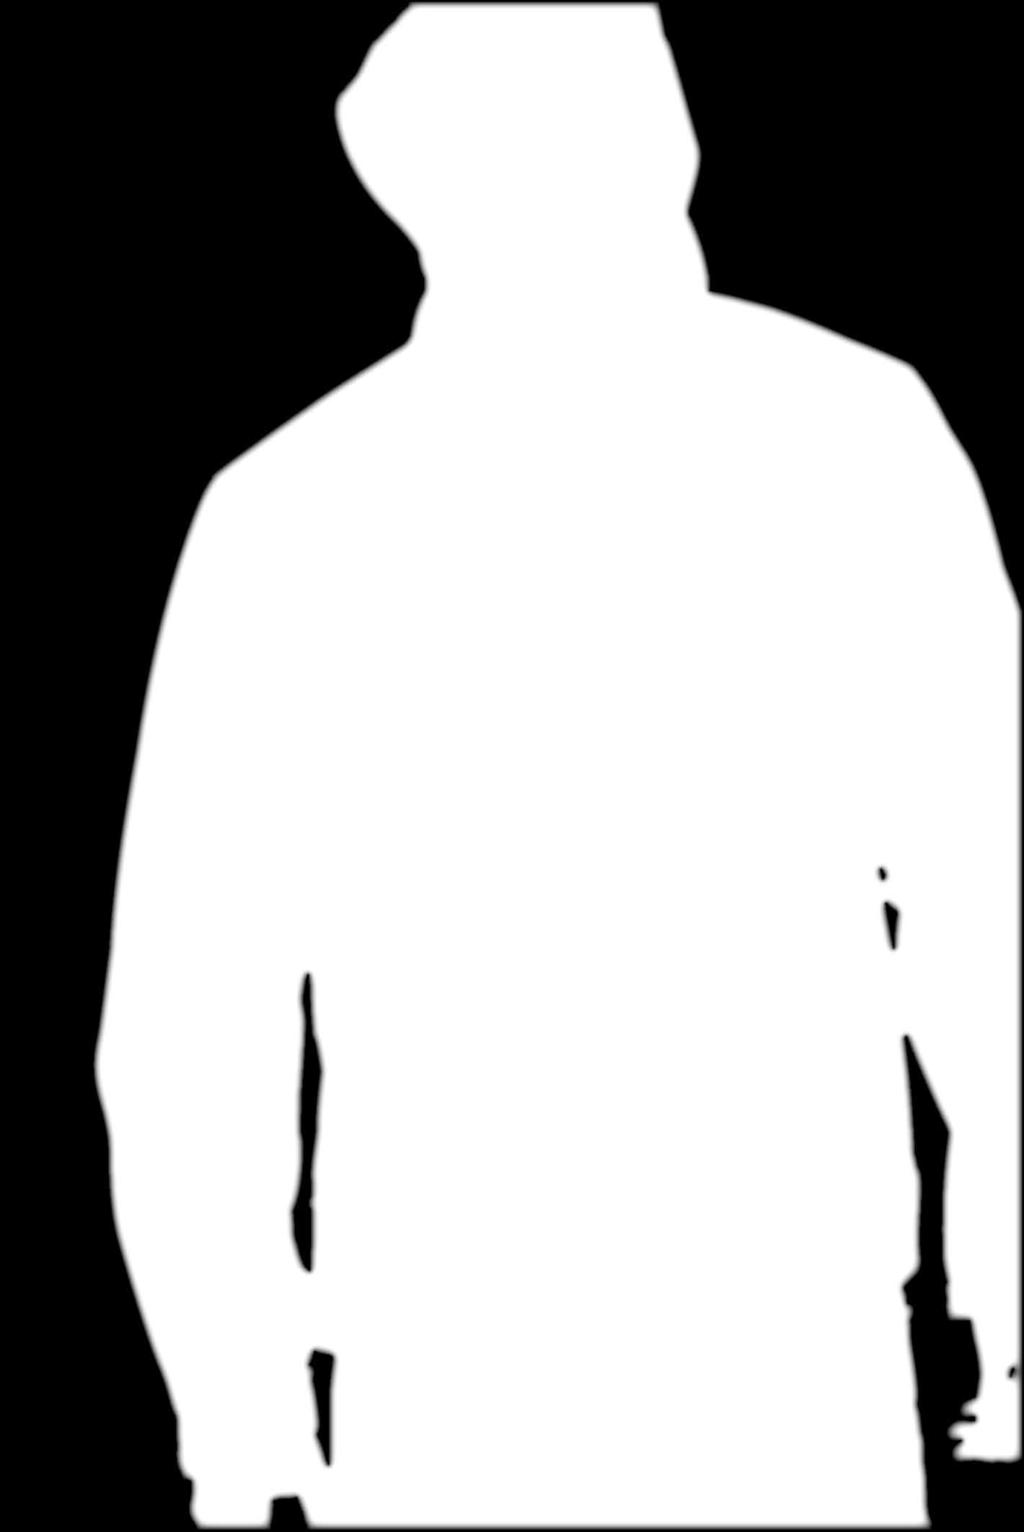 IS-F logo on left chest.